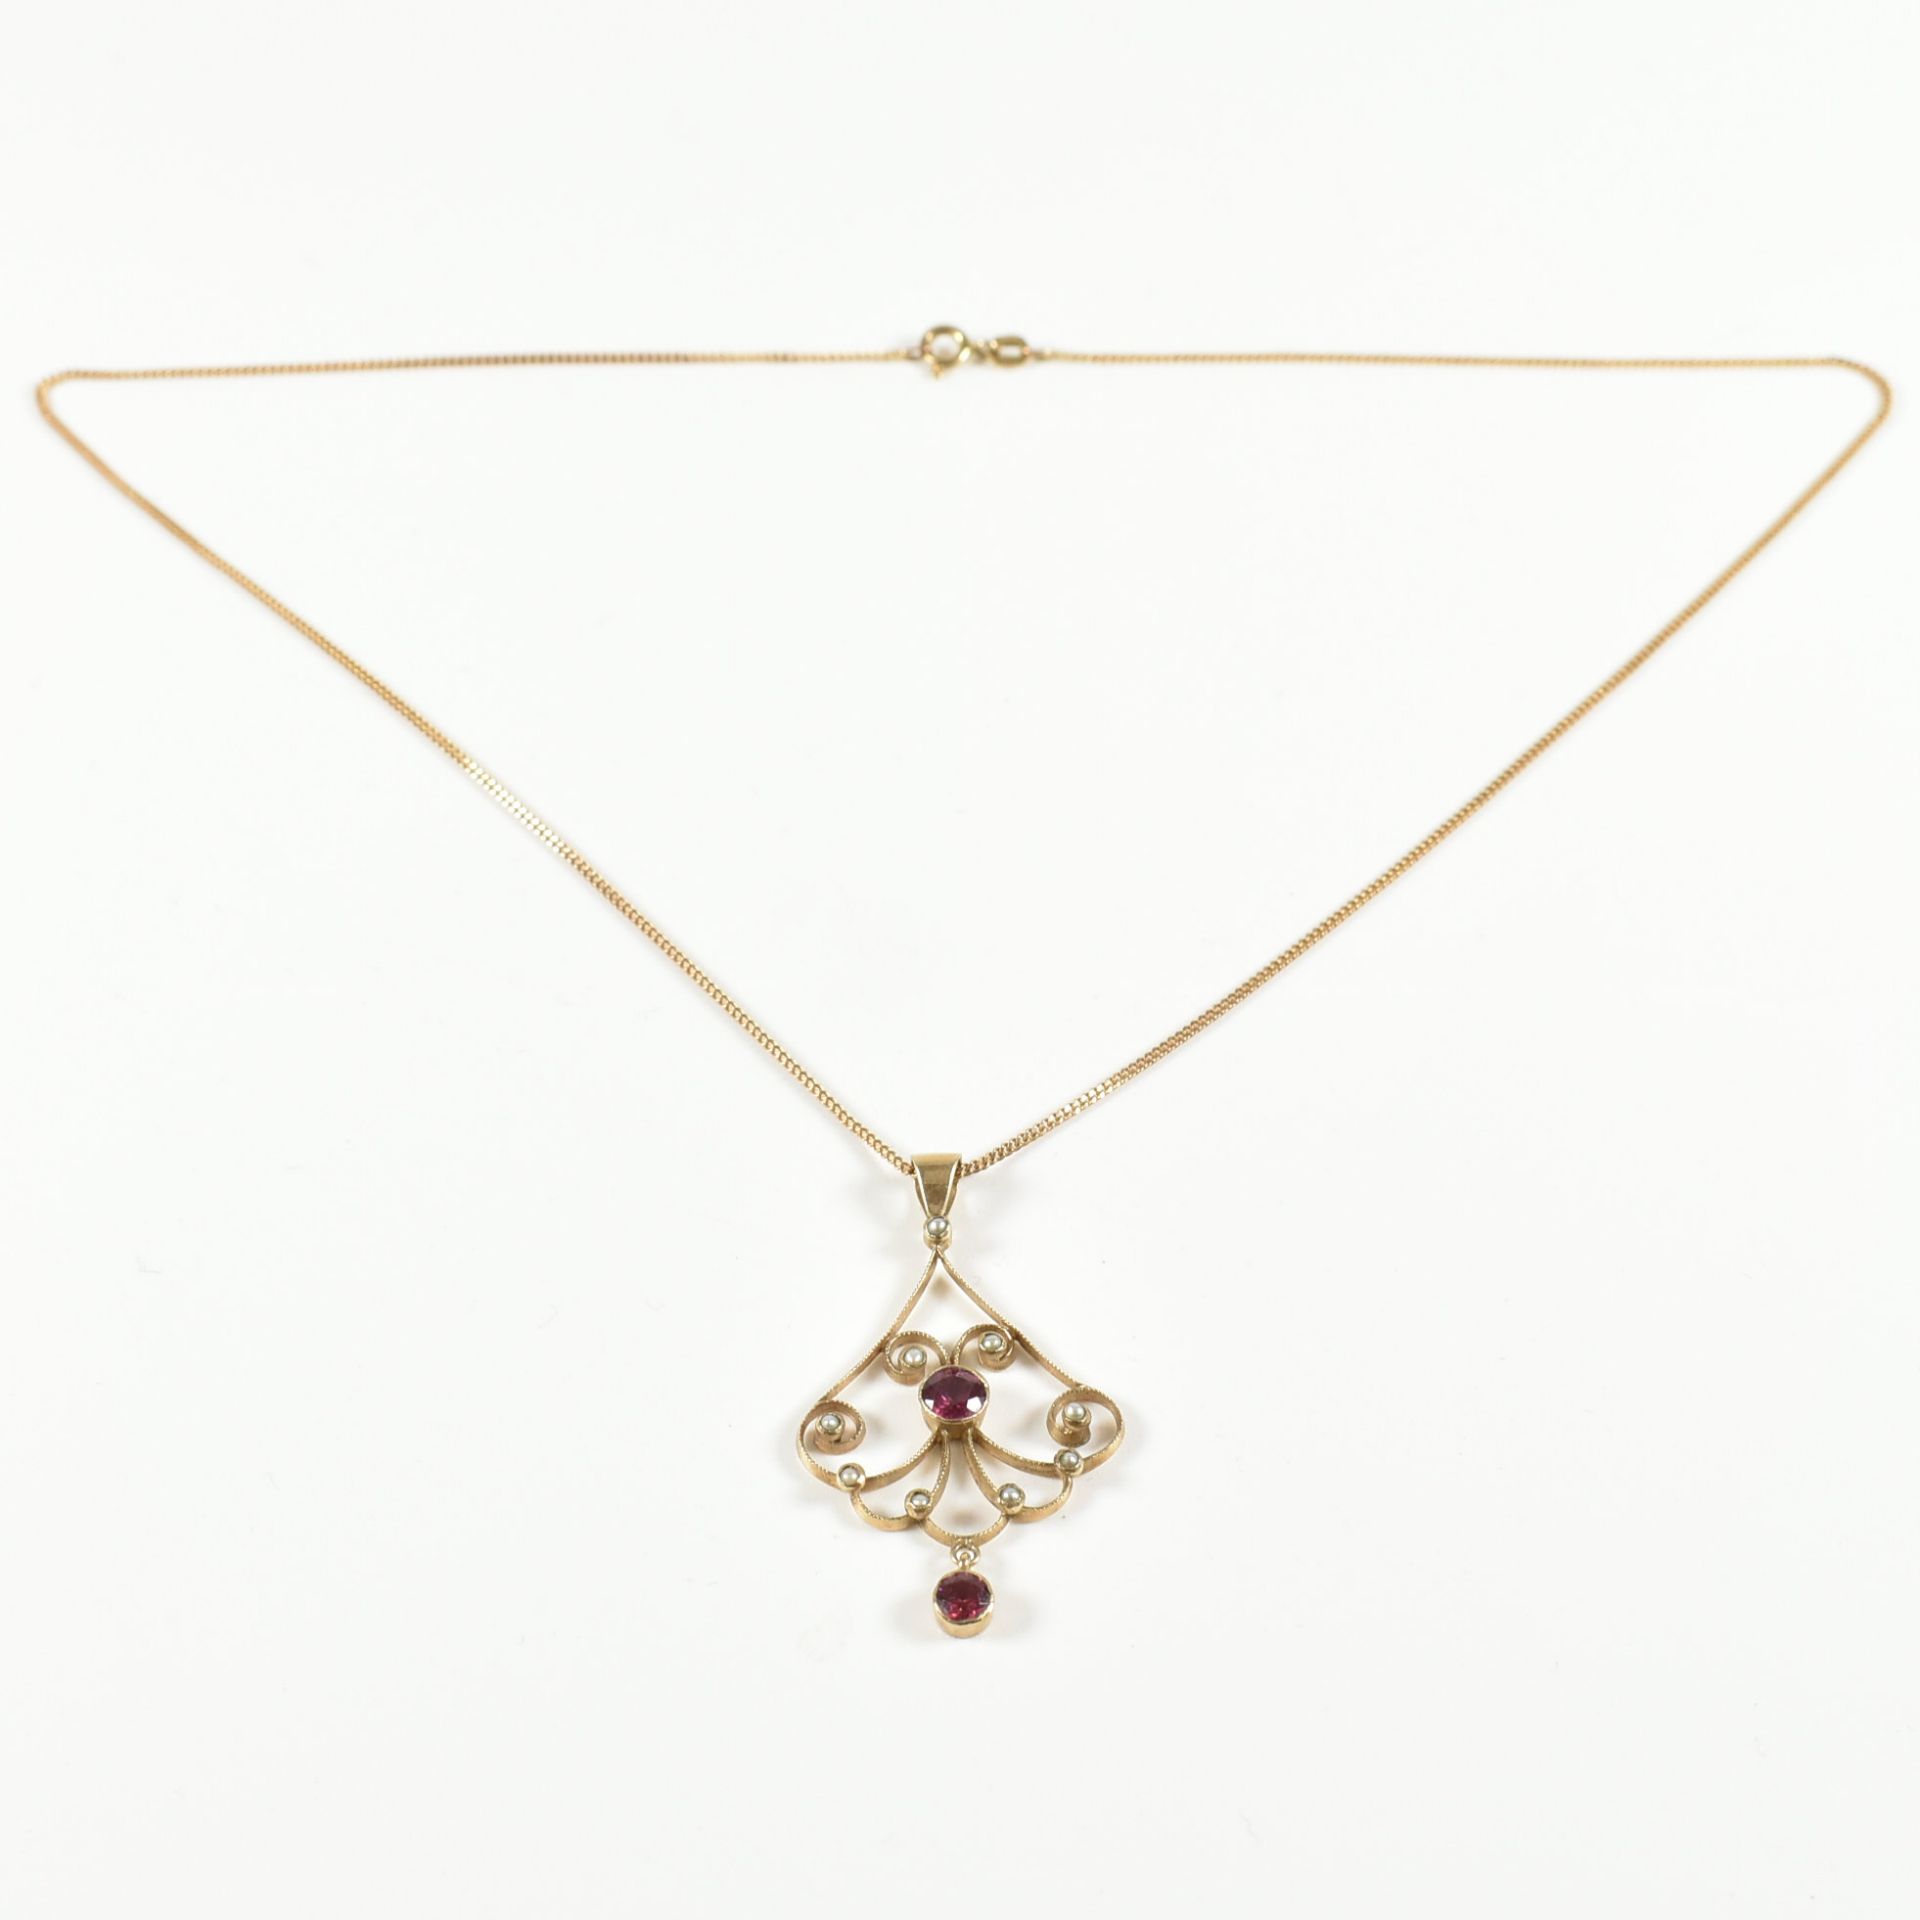 HALLMARKED 9CT GOLD SEED PEARL& GARNET PENDANT NECKLACE - Image 9 of 9